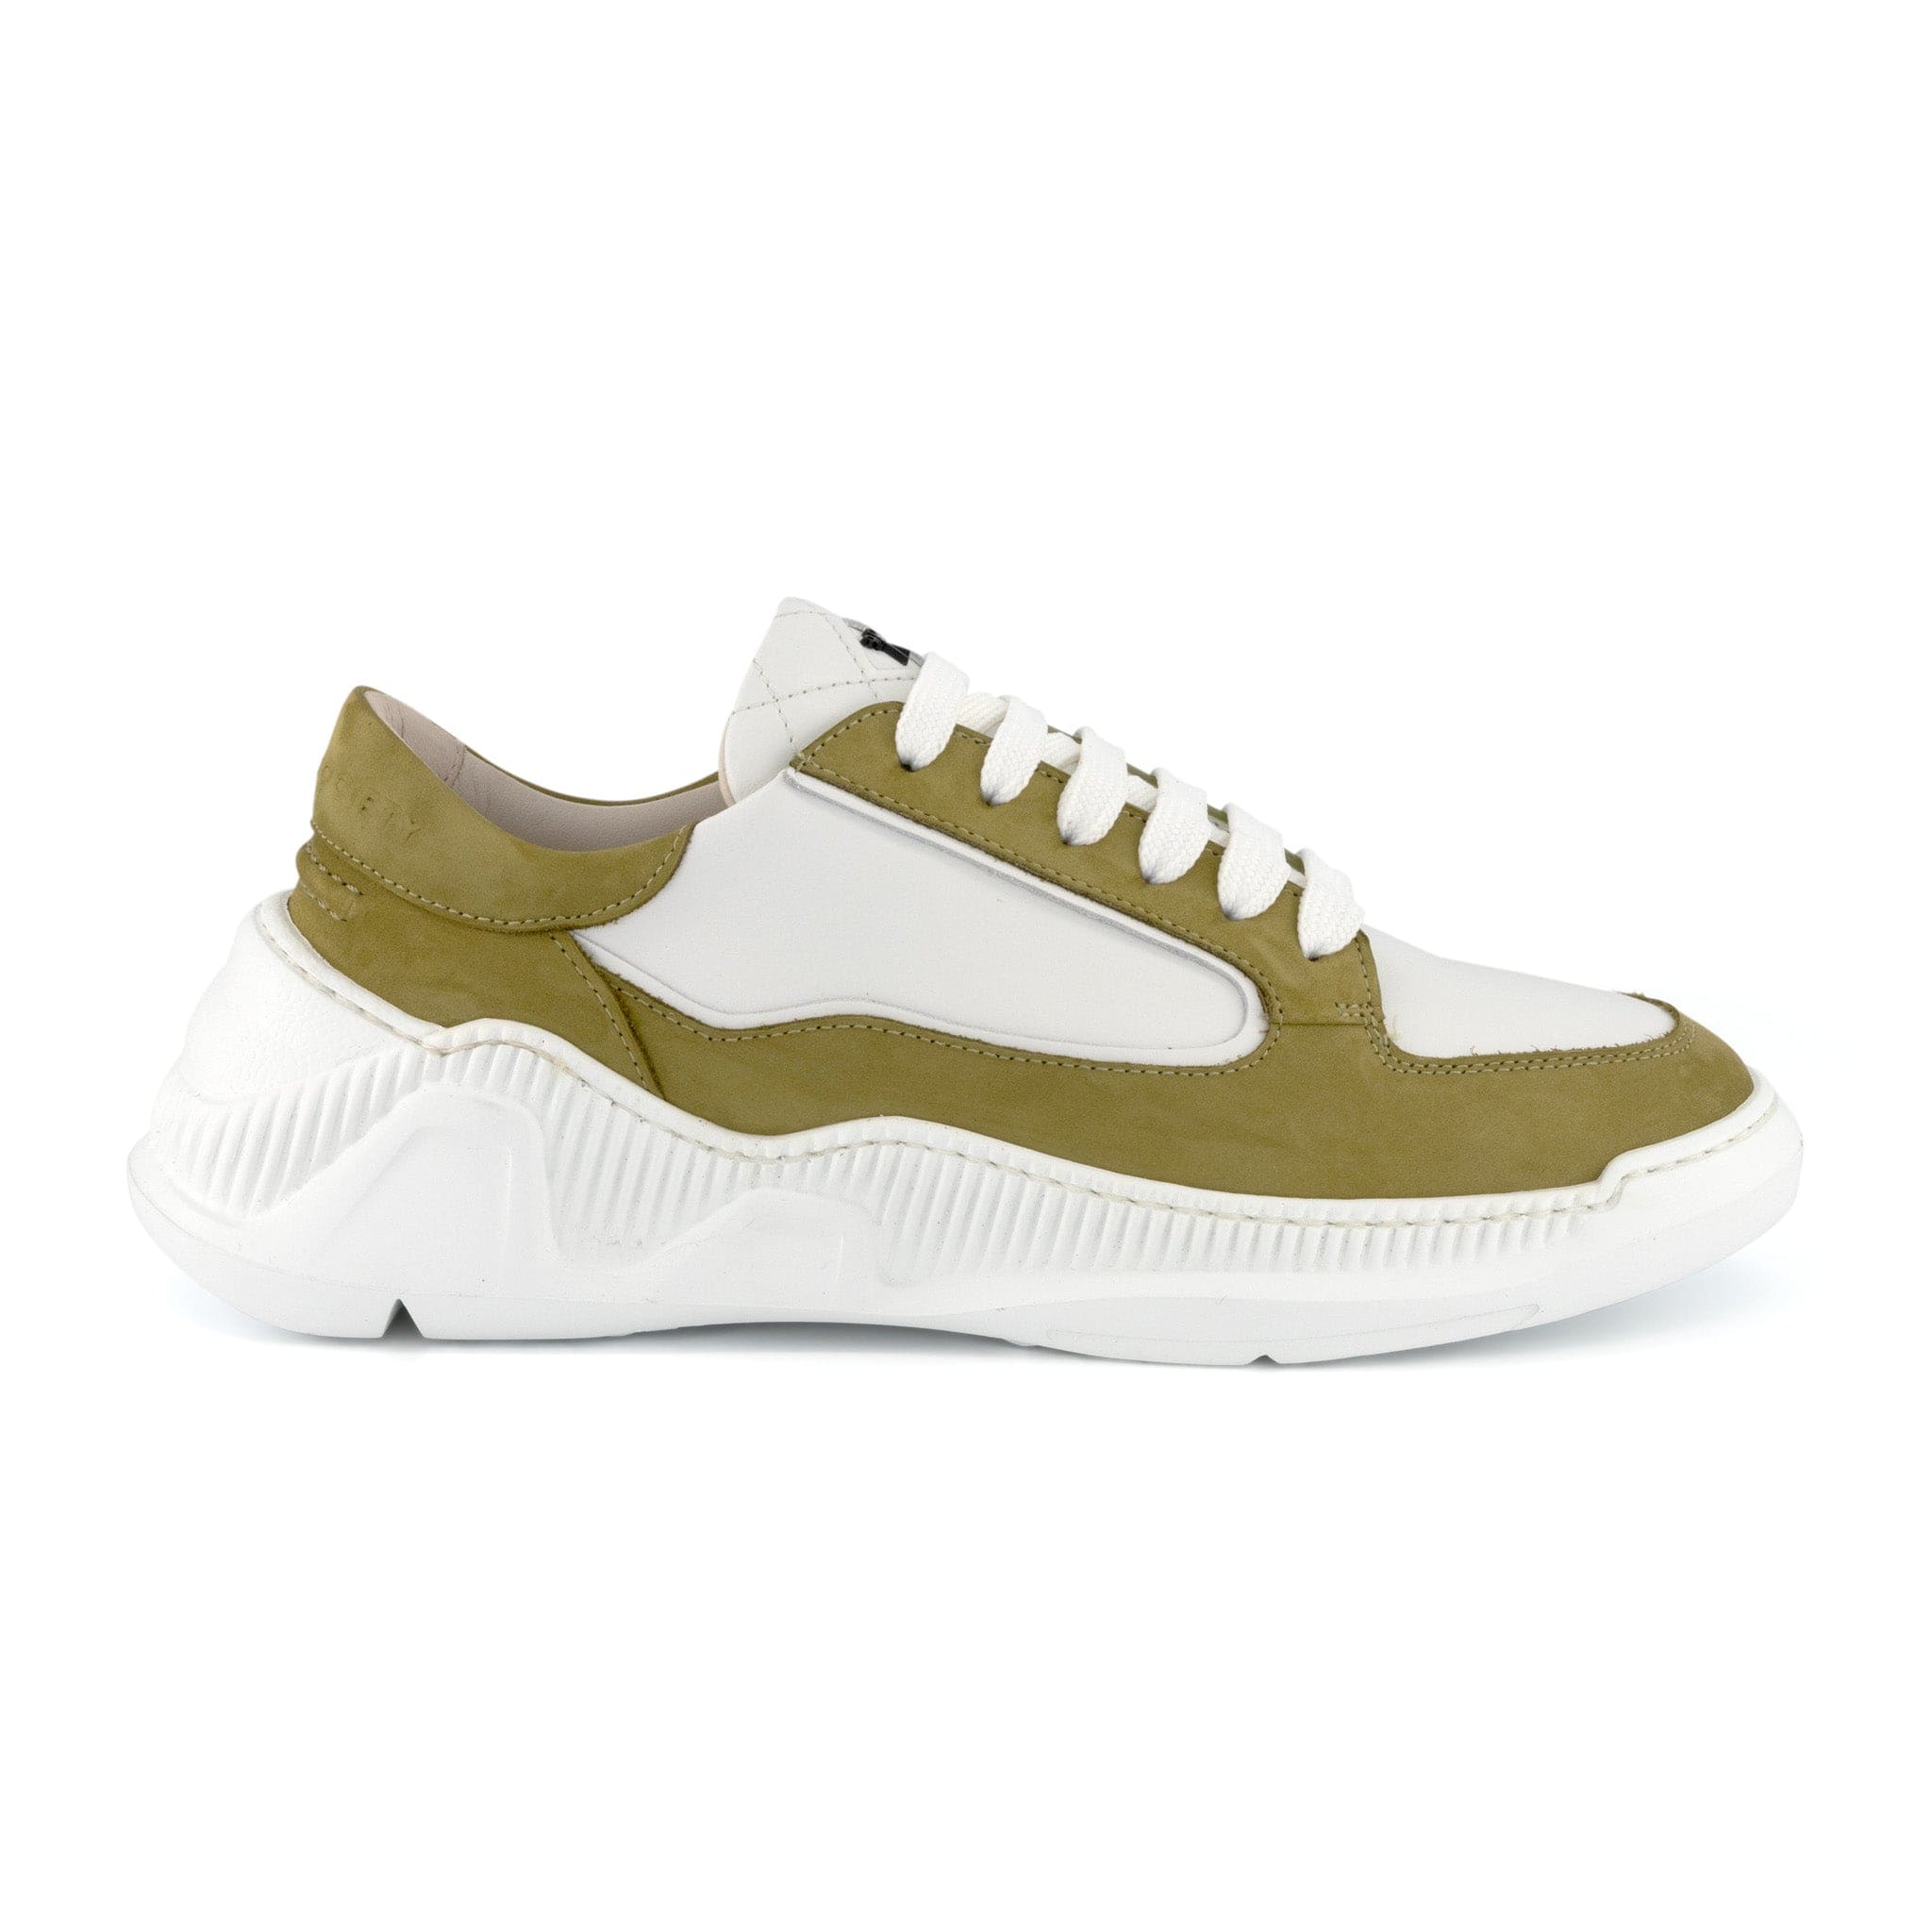 Nesto Low Top Italian Leather Sneaker | Light Olive and White | Made in Italy | Sizes 37, 40